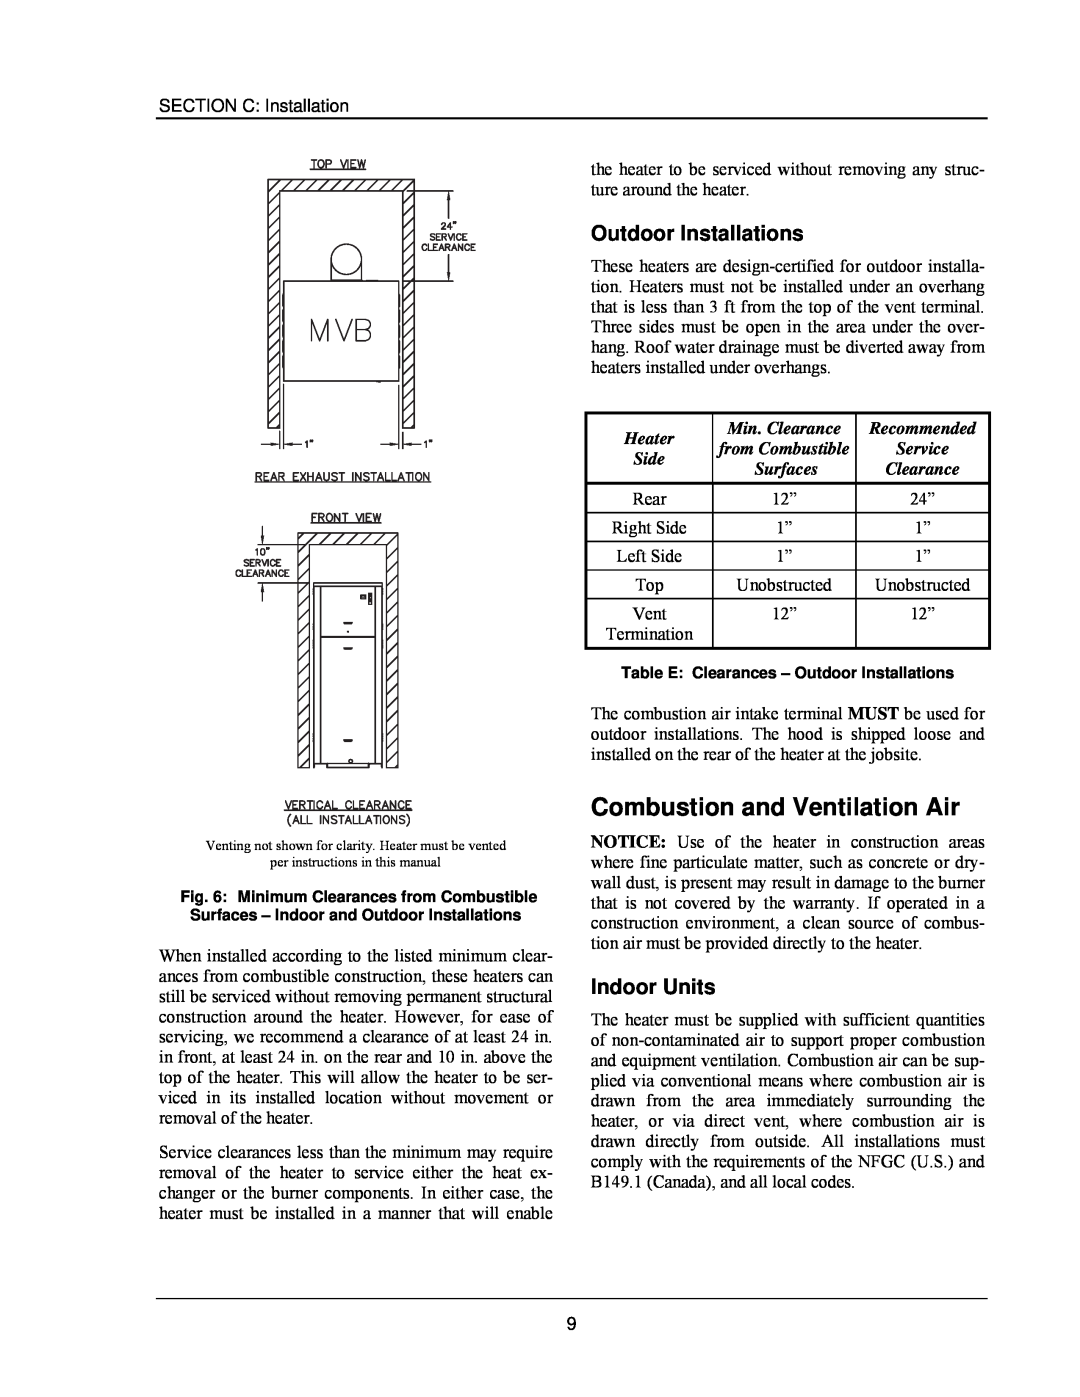 Raypak 503-2003 manual Combustion and Ventilation Air, Outdoor Installations, Indoor Units 